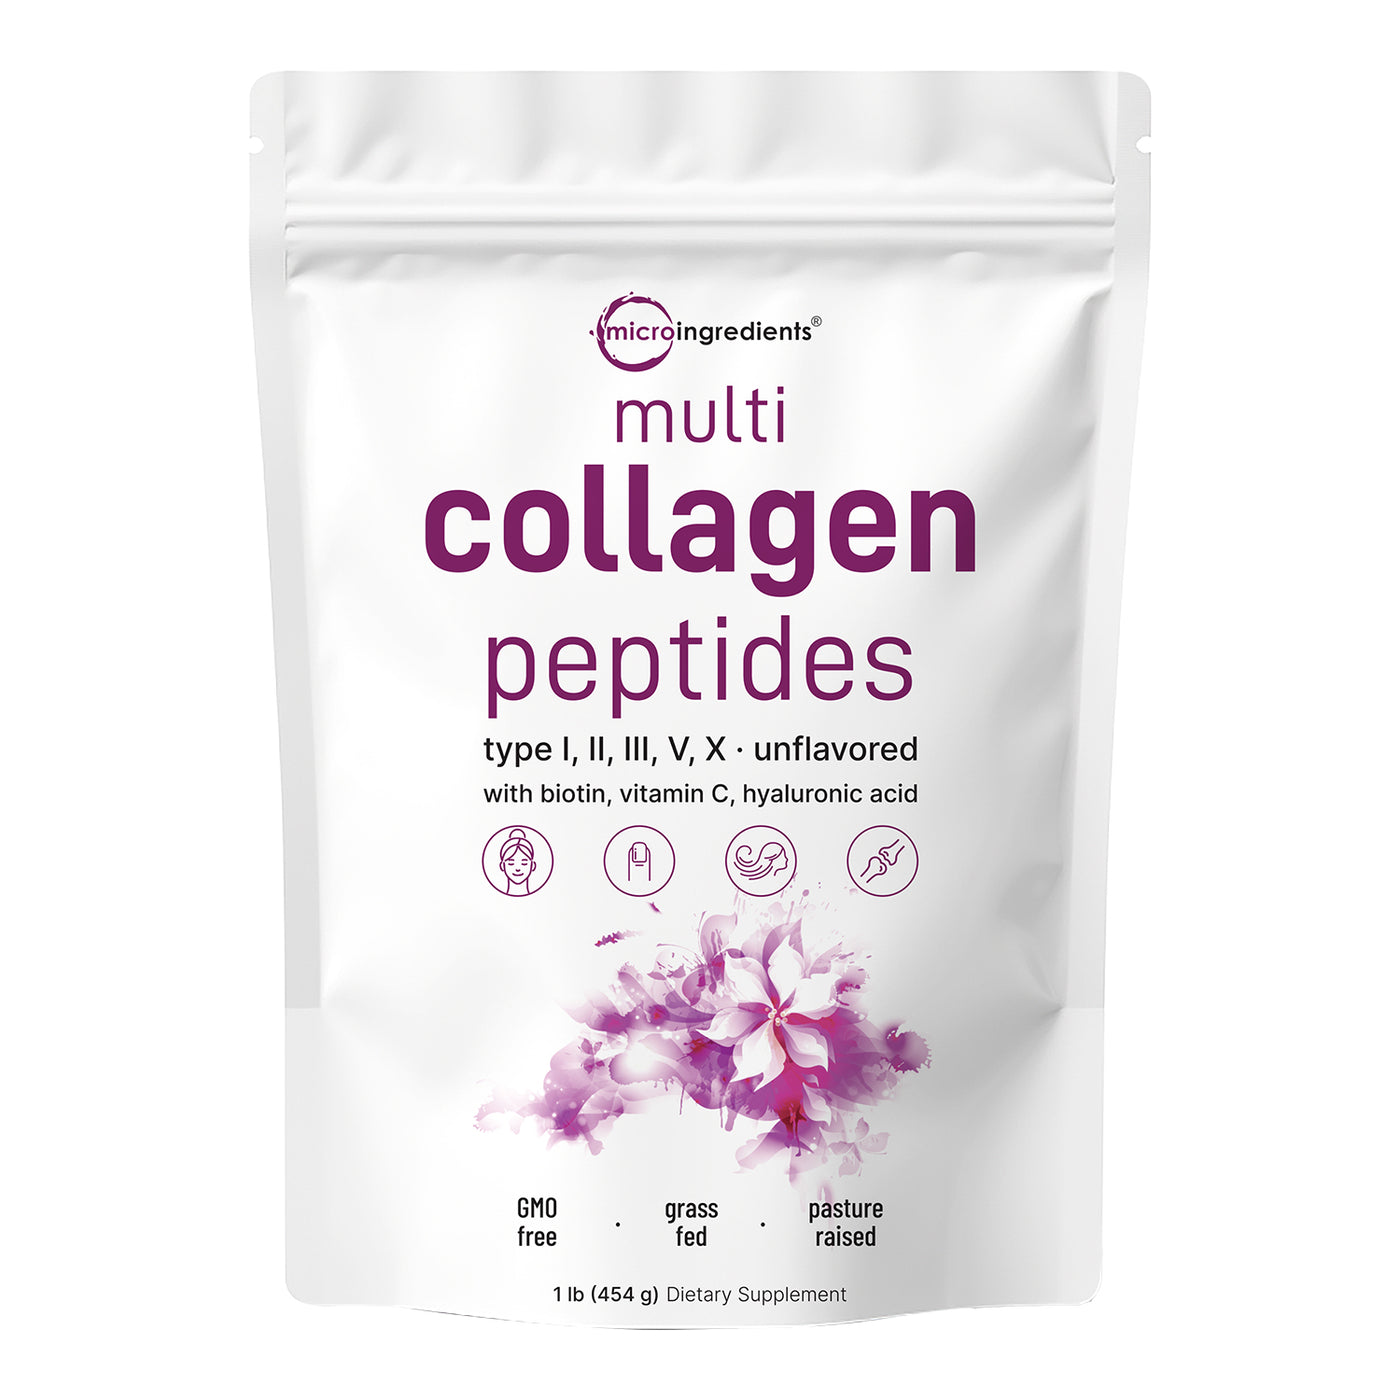 Multi Collagen Peptides Powder - Hydrolyzed Protein Peptides (Type I,II,III,V,X) with Hyaluronic Acid, Biotin & Vitamin C - Unflavored